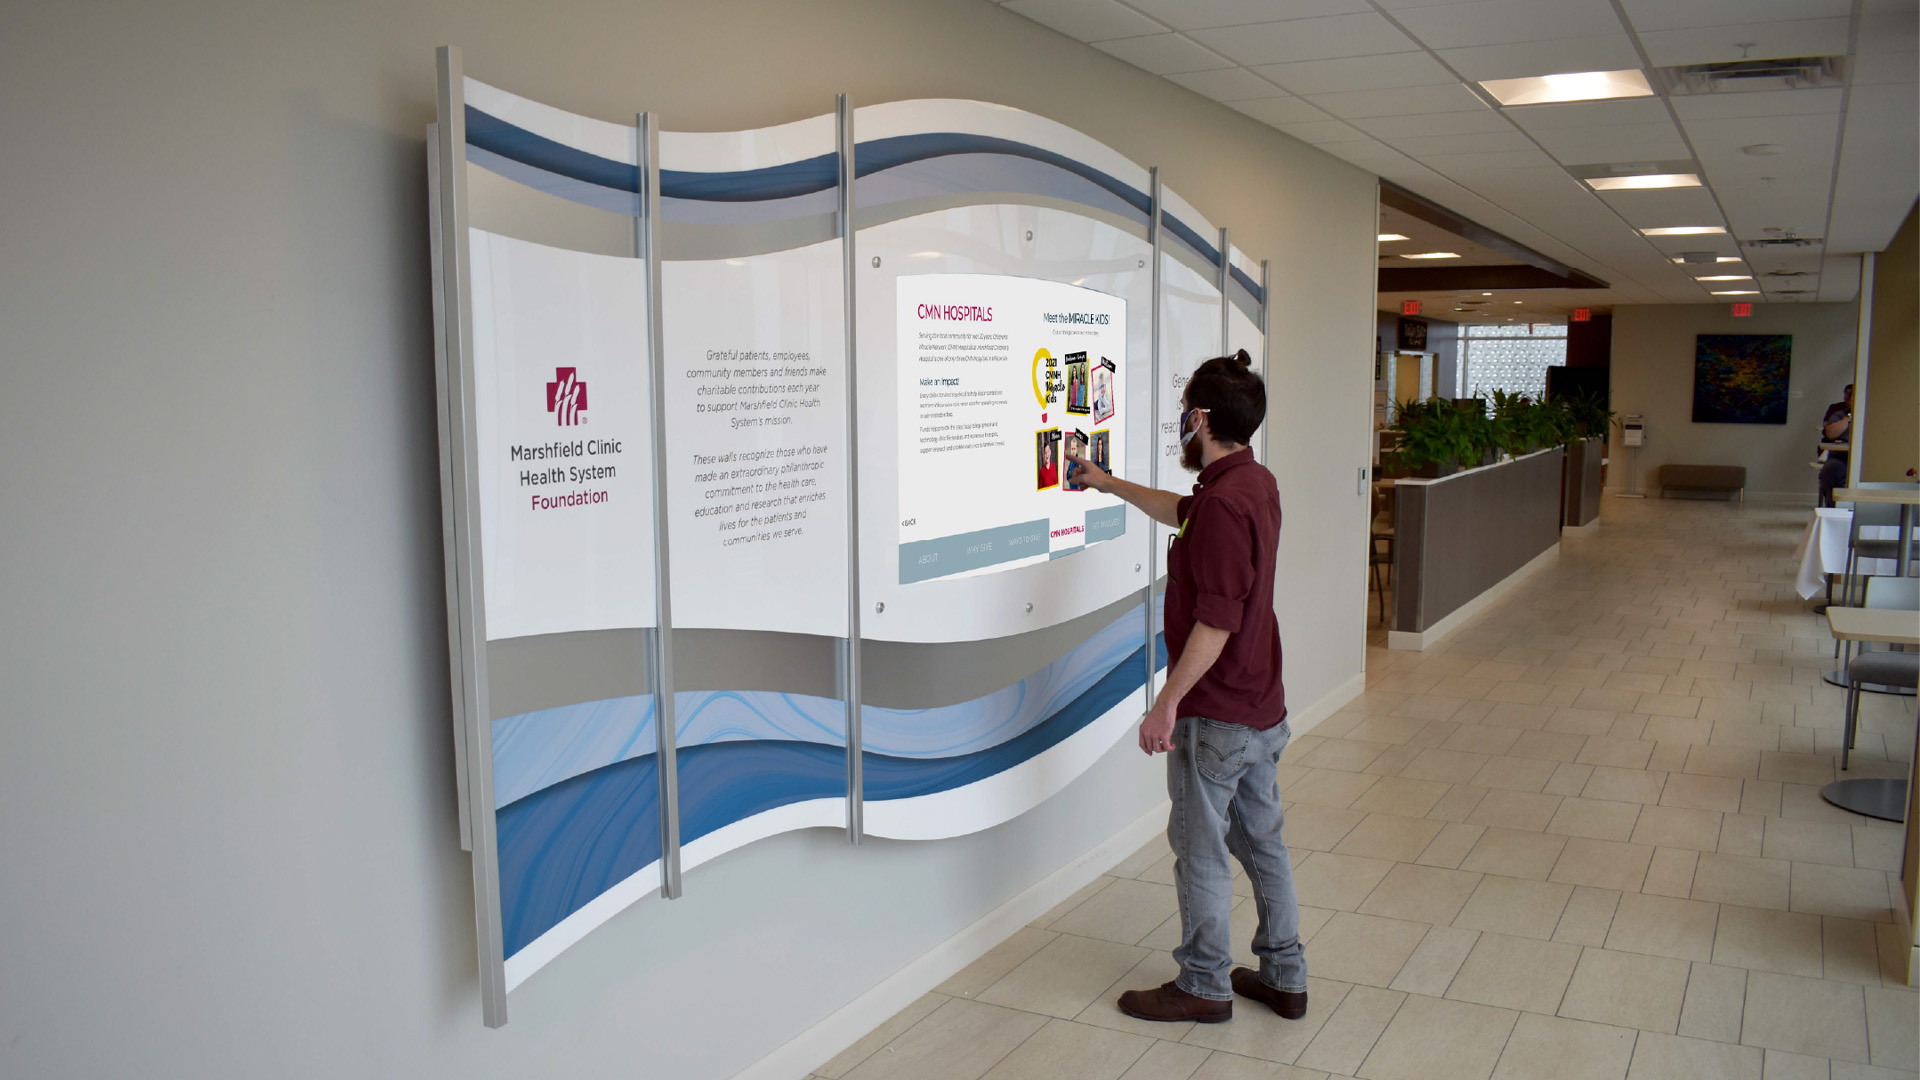 Layered Plexiglass and prints create and attractive surround for this digital donor wall in this medical clinic